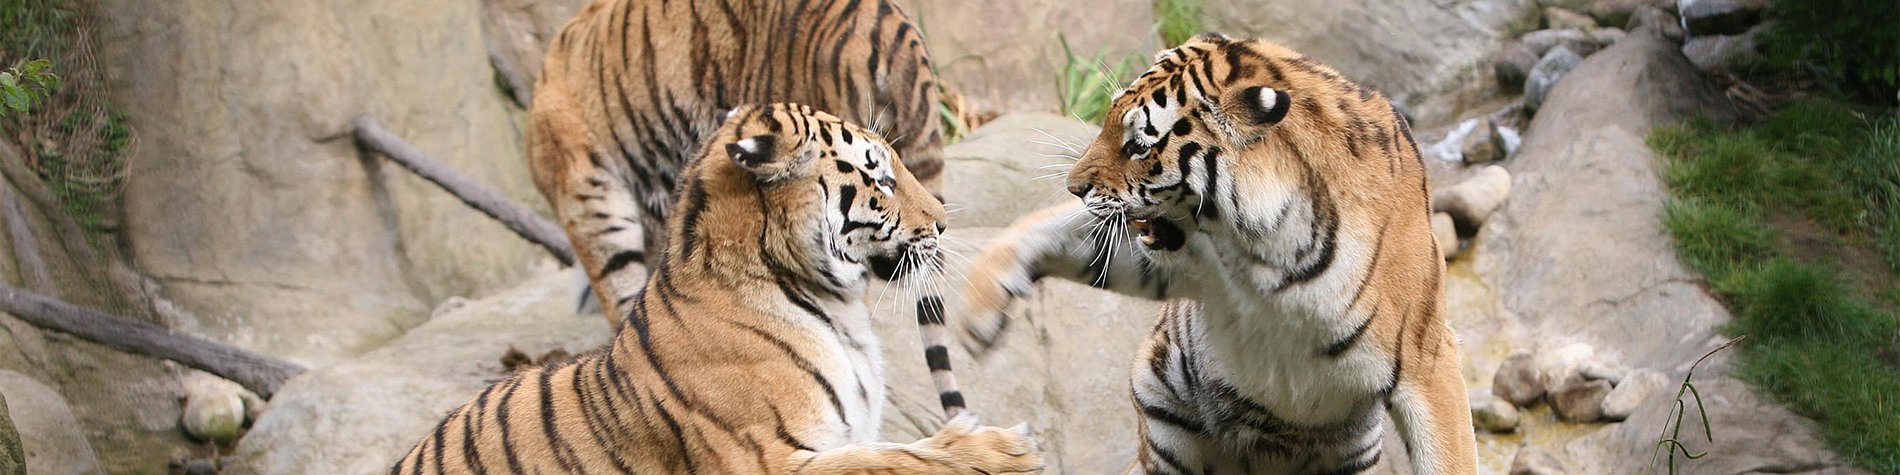 Tigers playing - 5 Things to Know About Dublin Zoo